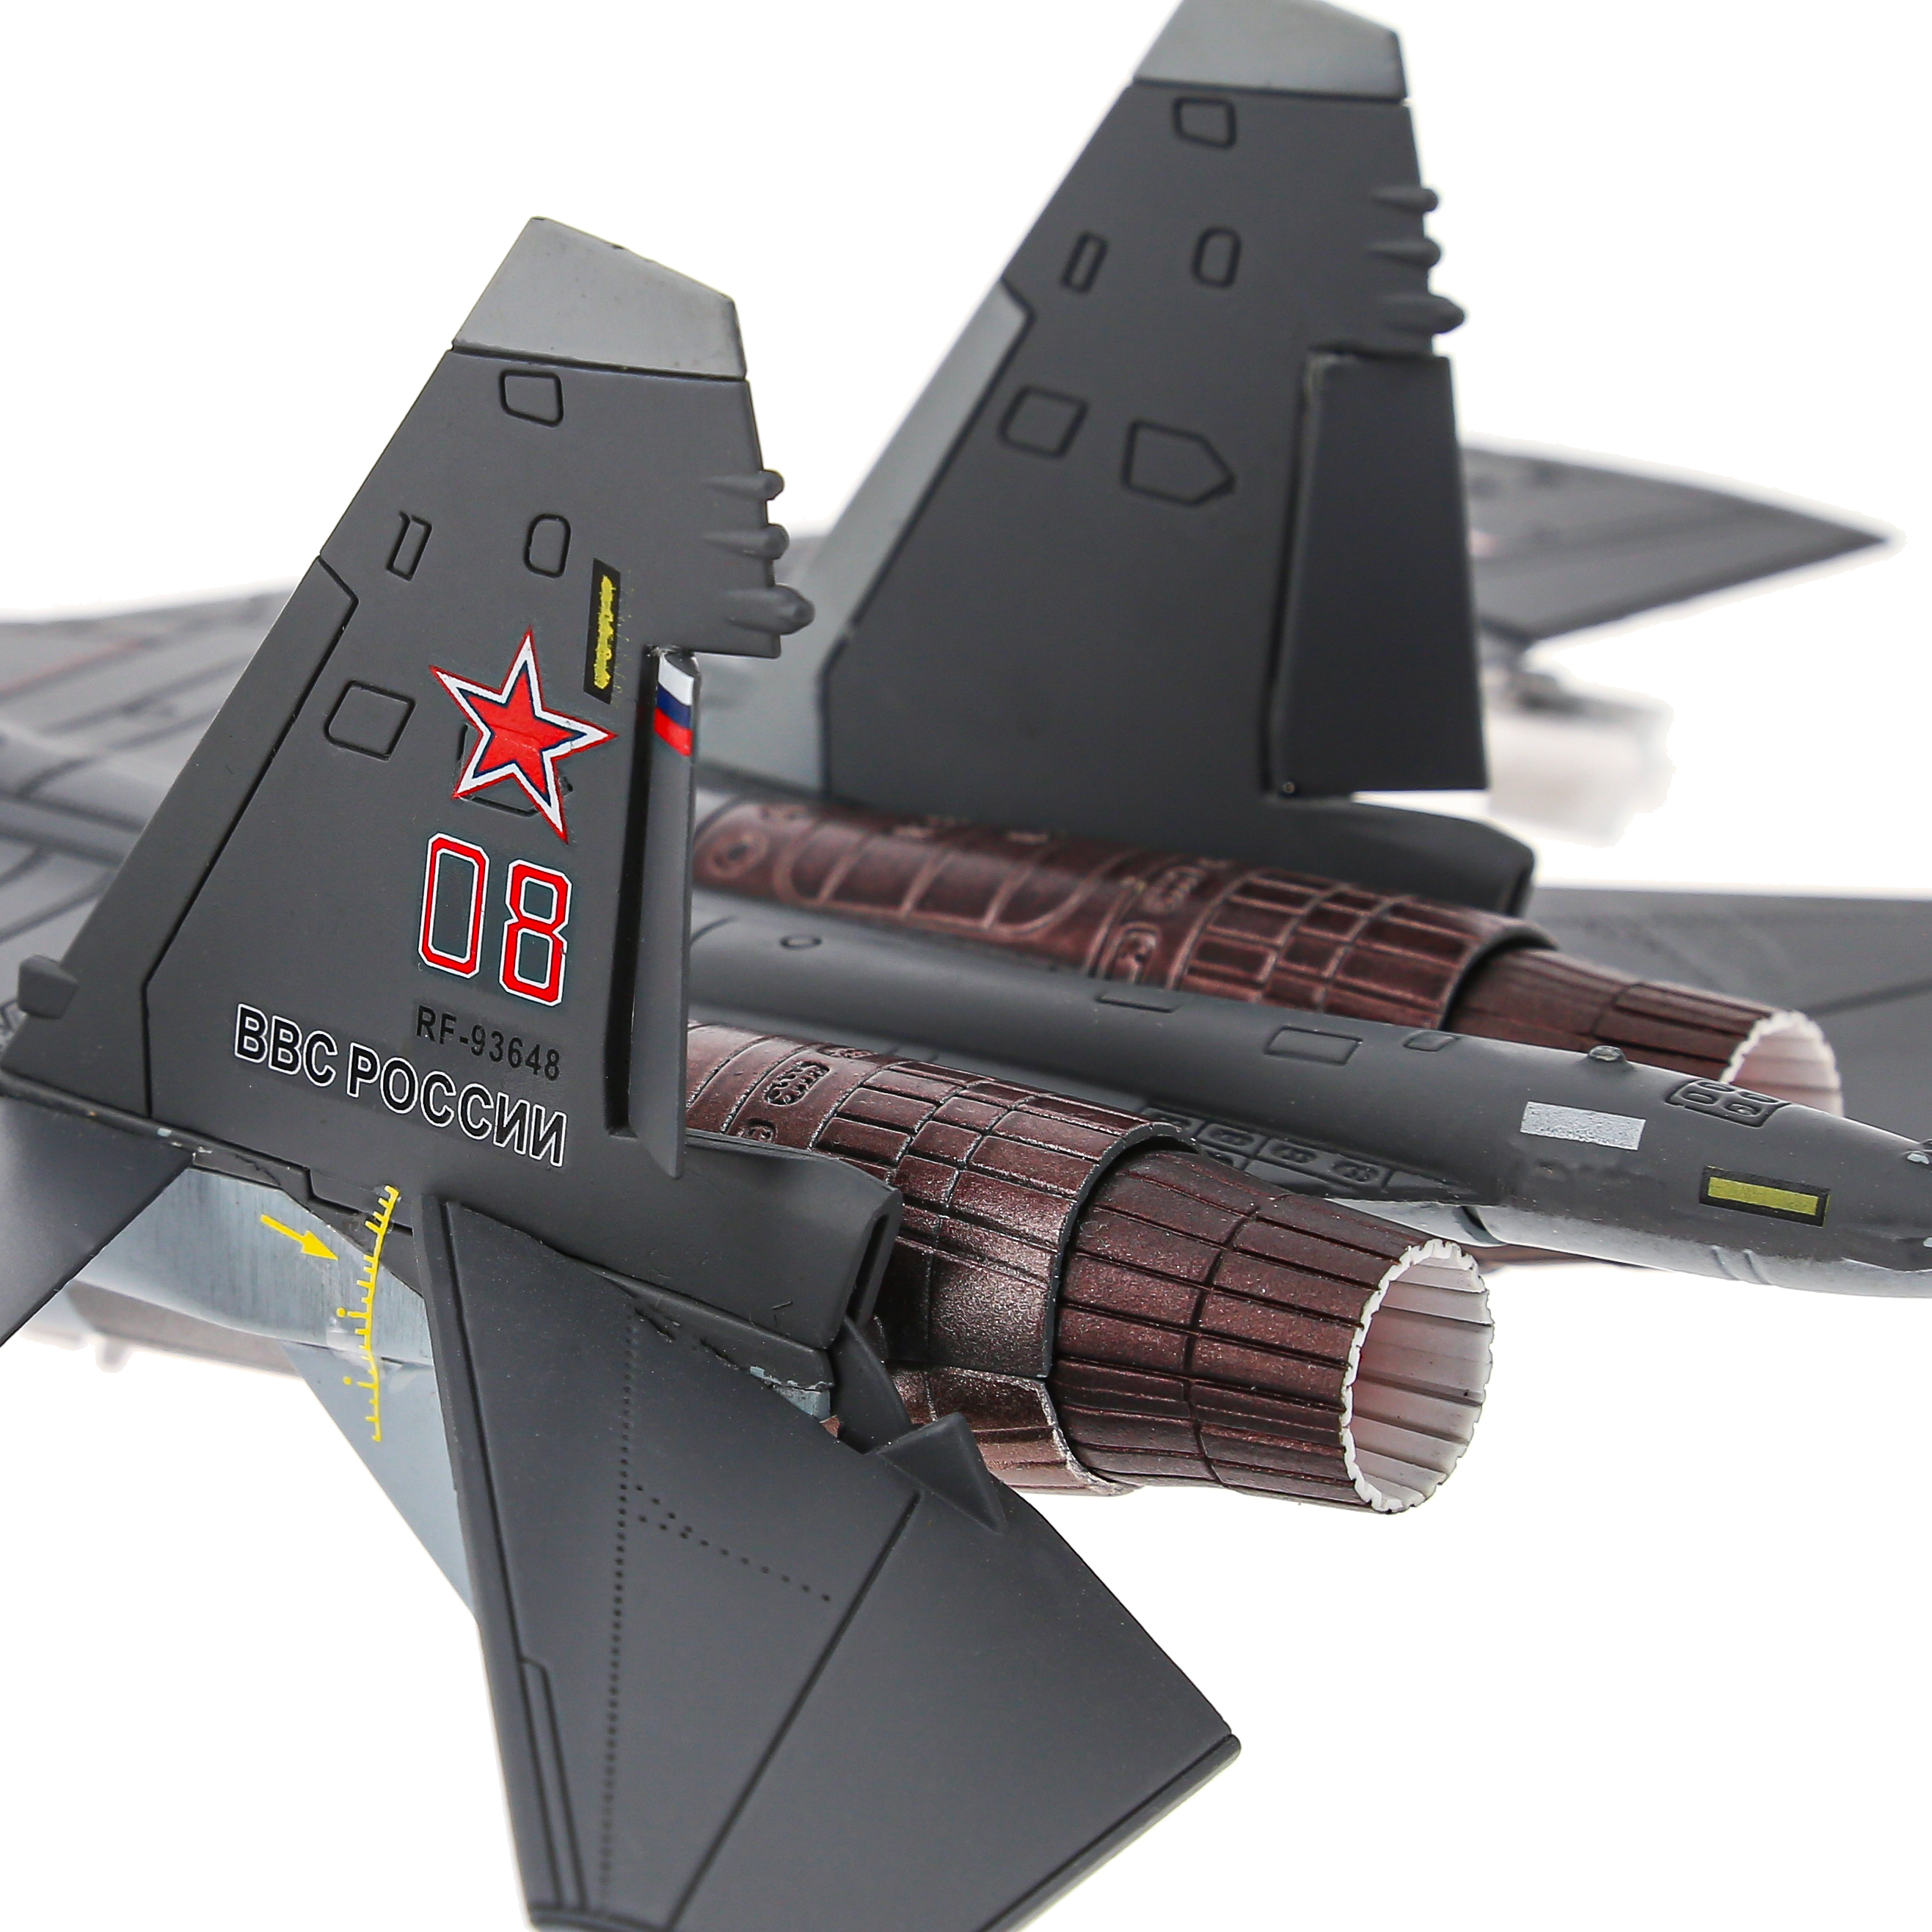    -35,  1:72 ,   32 . The model of the Russian Su-35 fighter, scale 1:72 metal, the length of the model is 32 cm. # 6 hobbyplus.ru